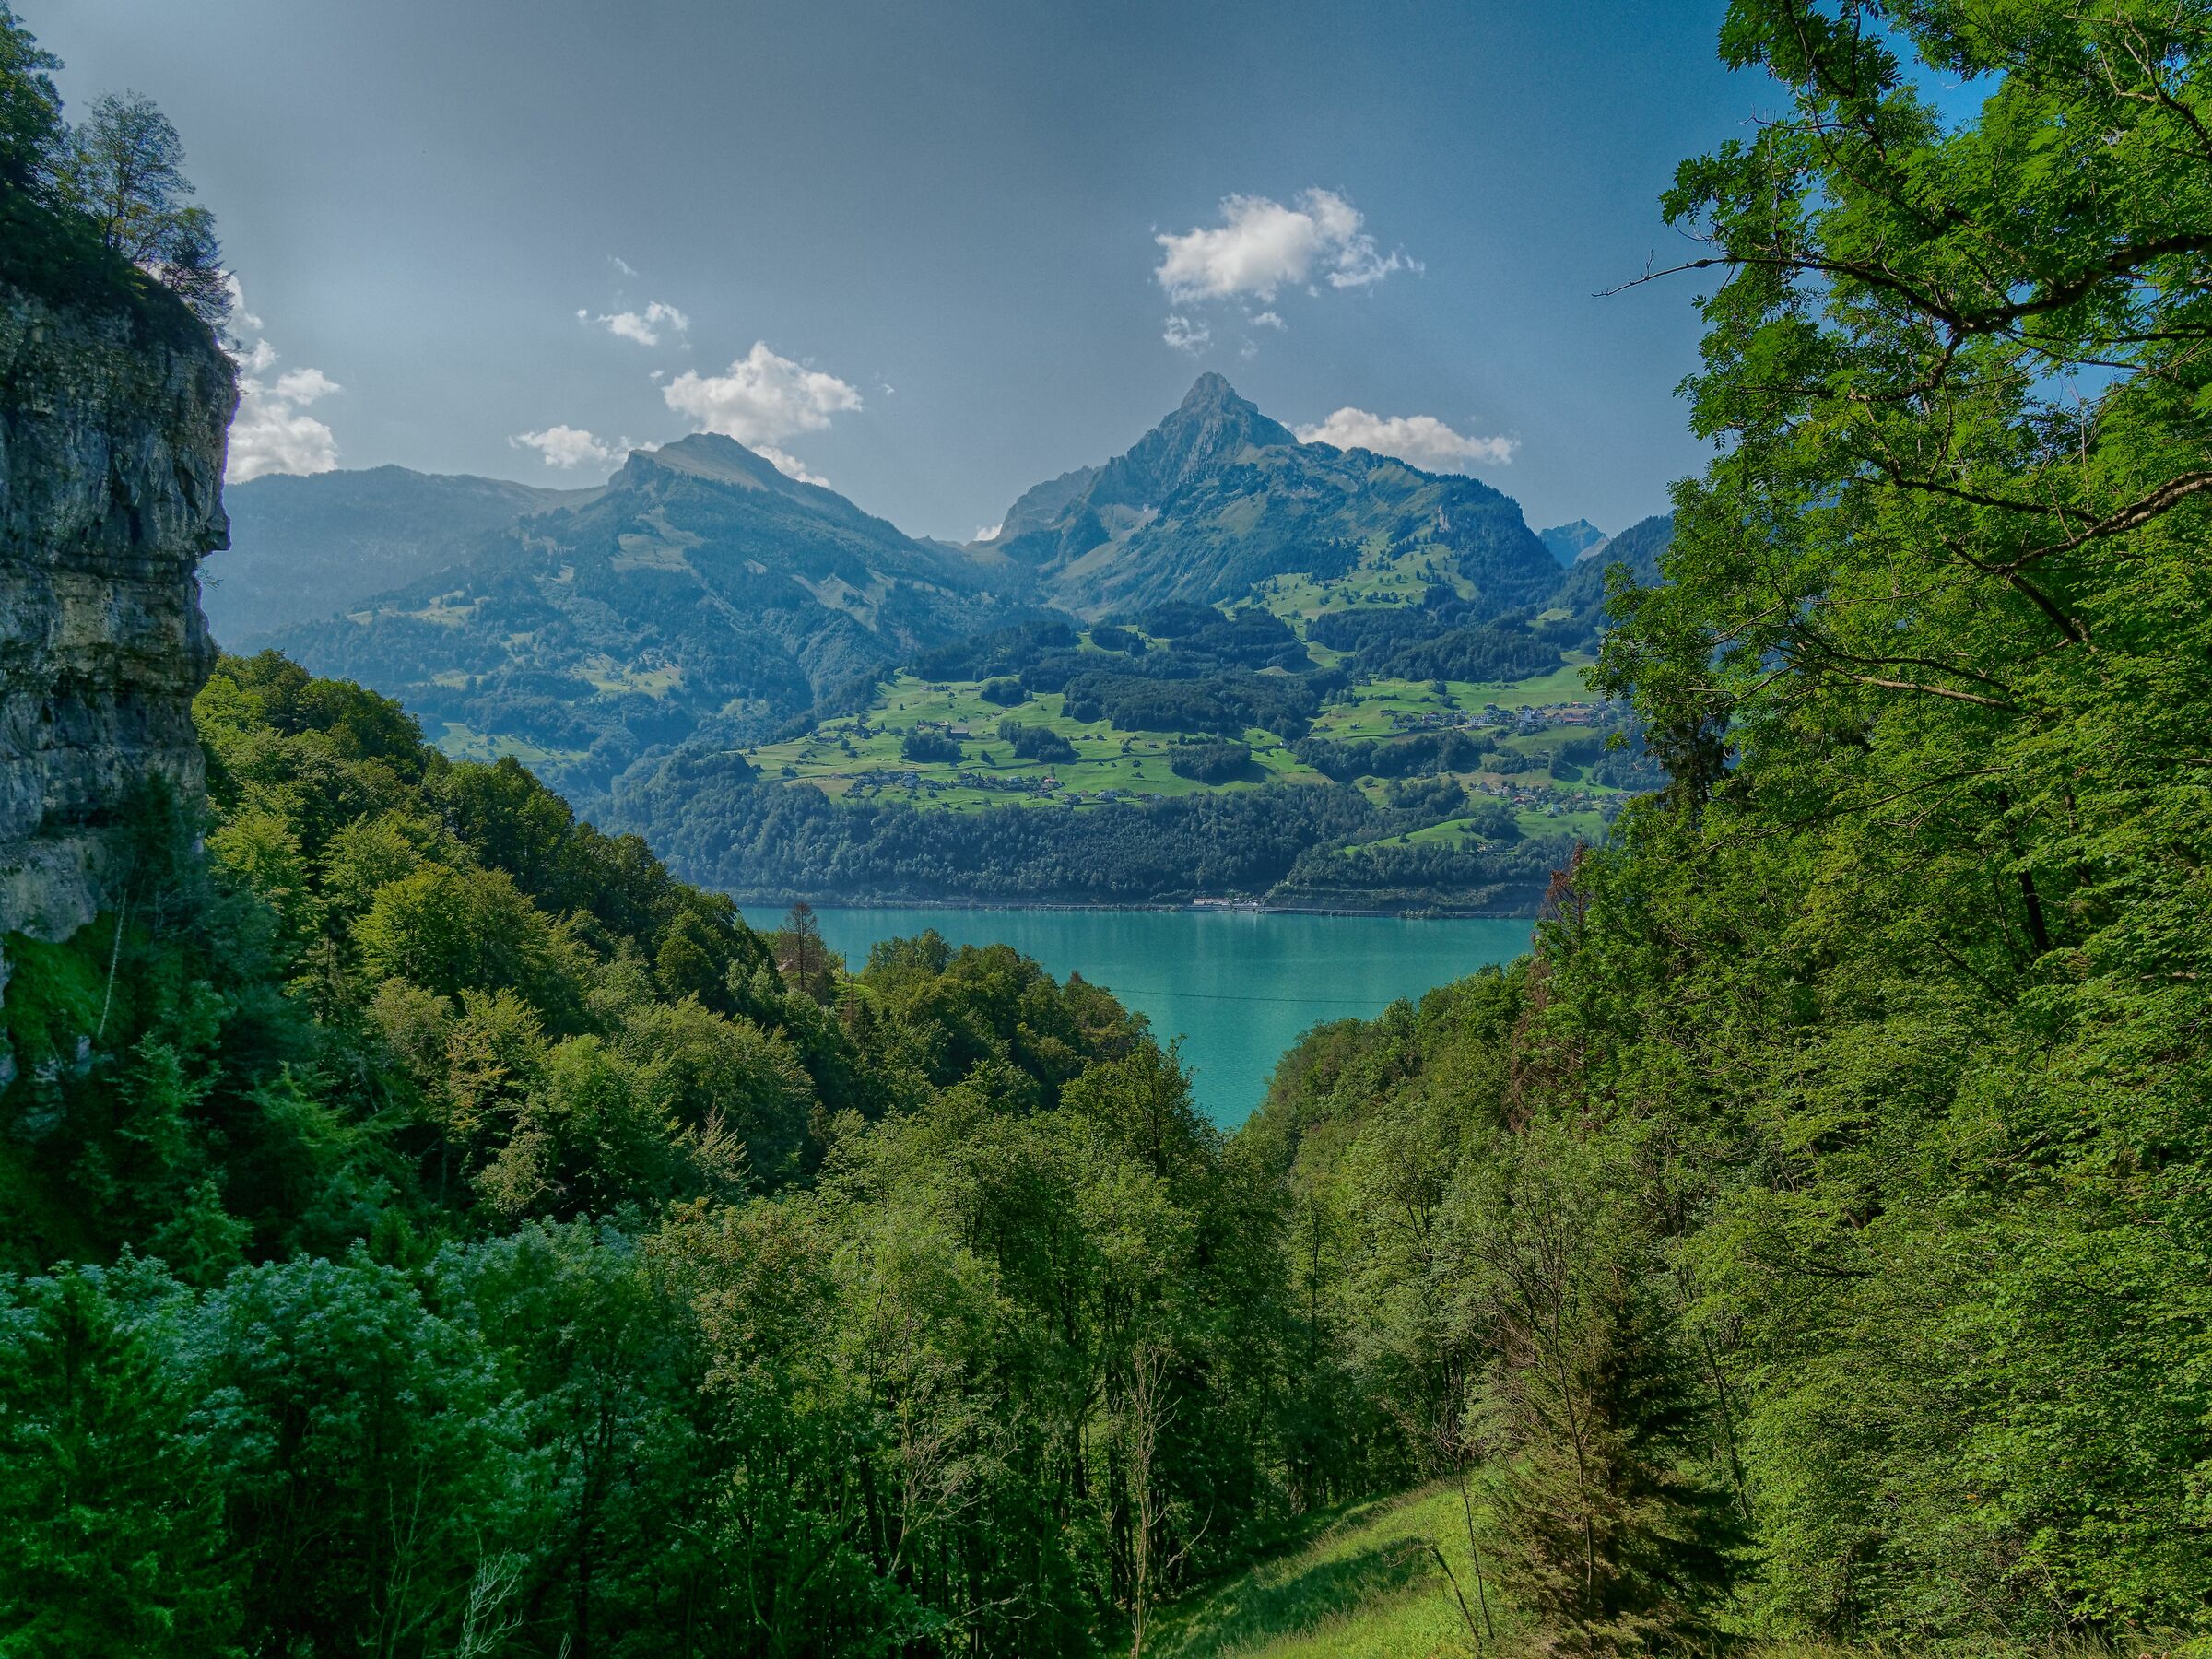 The "Walensee" from the Seerenbachfälle...